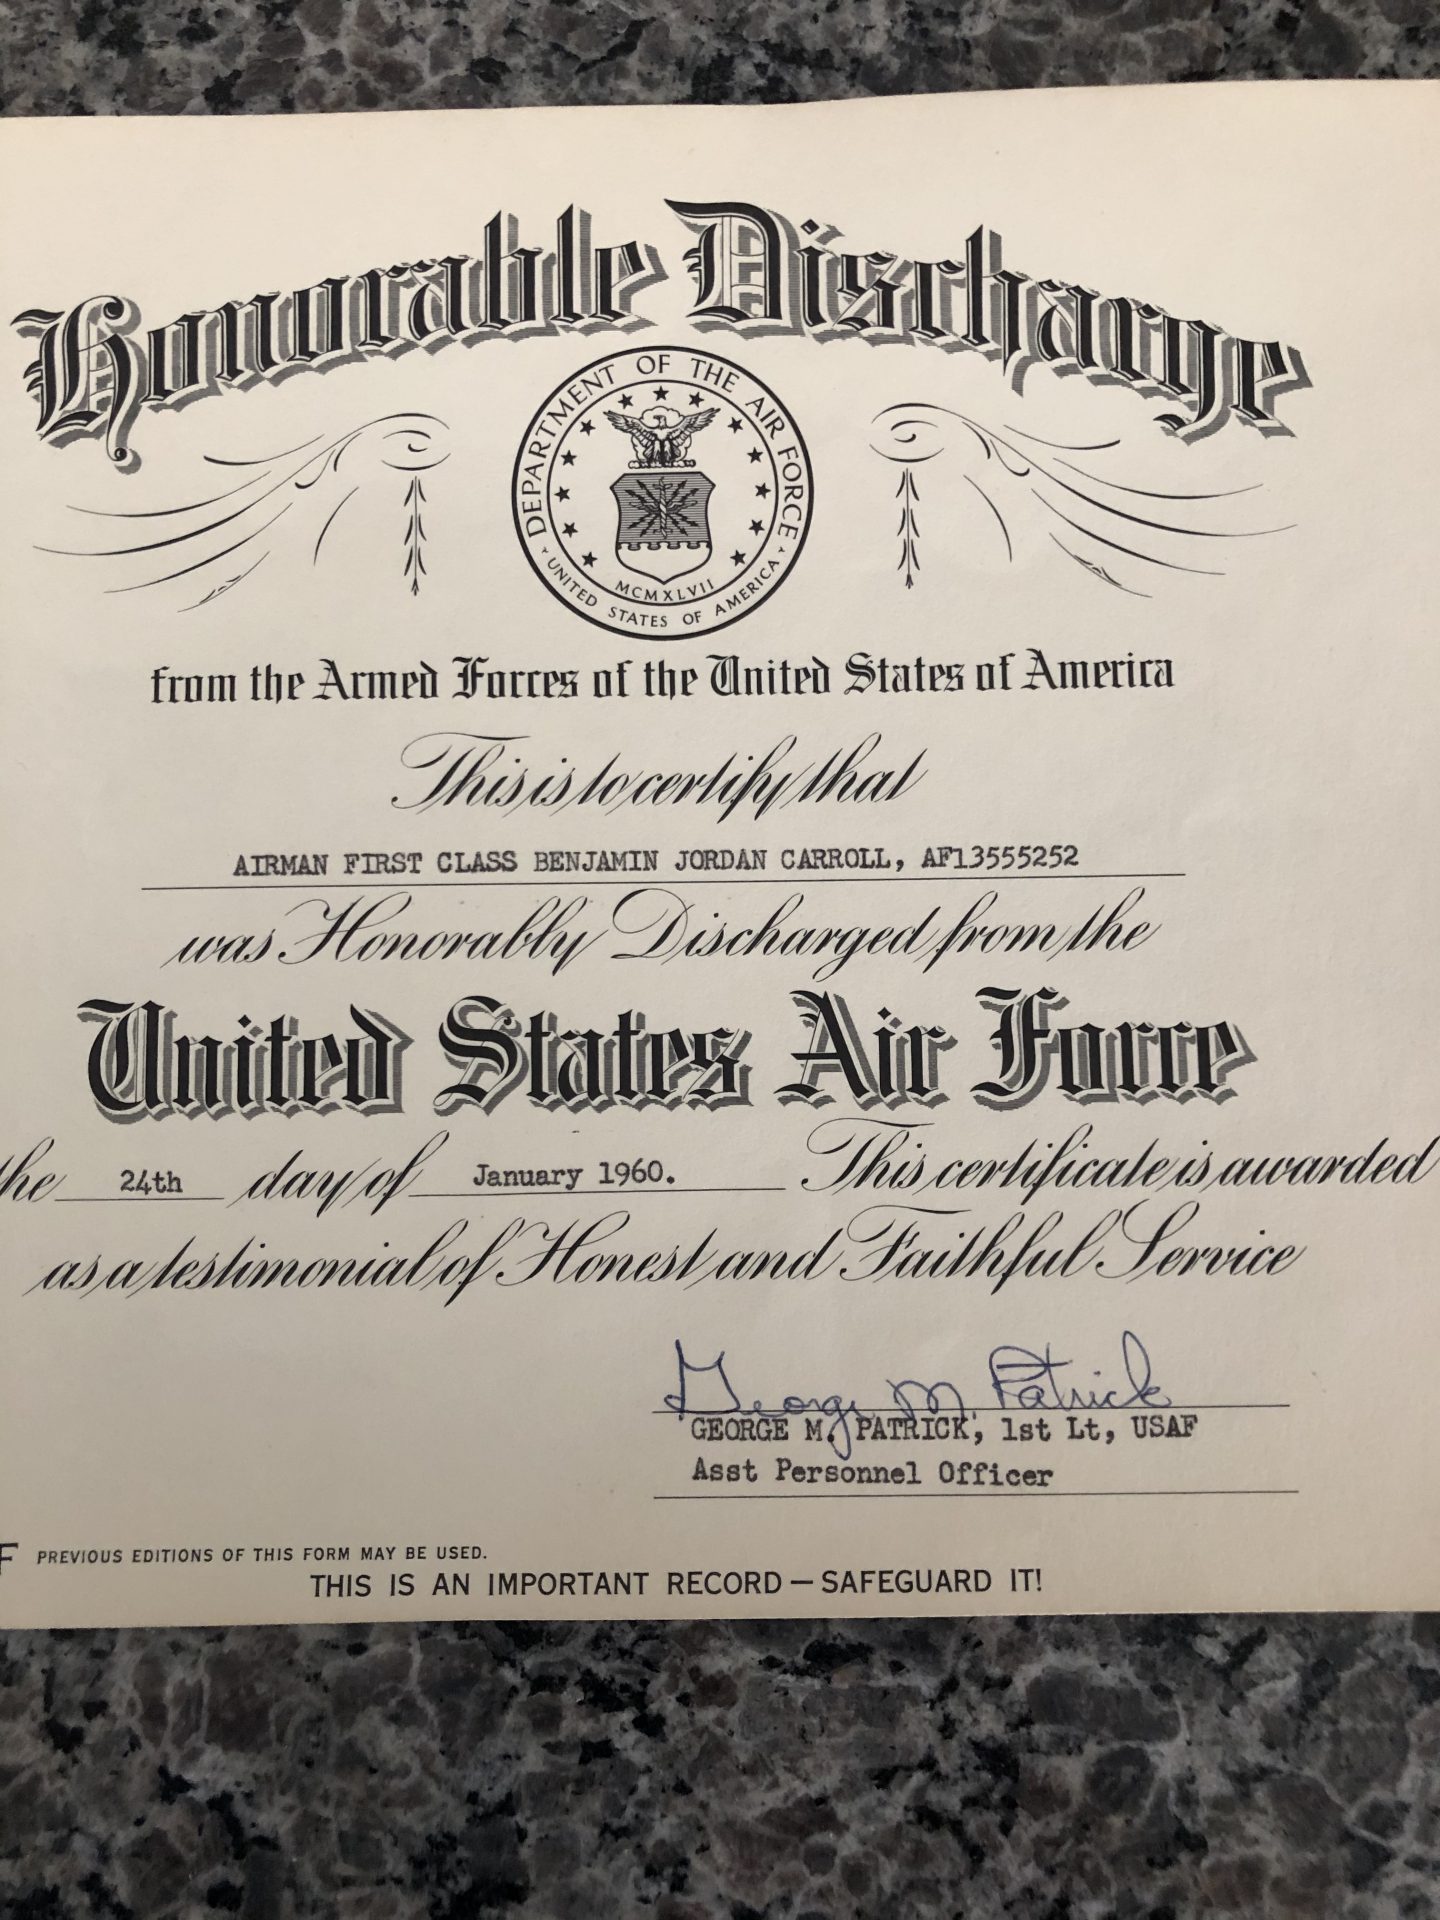 One of two honorable discharged dad received from the Air Force.<br />
1960 and 1964